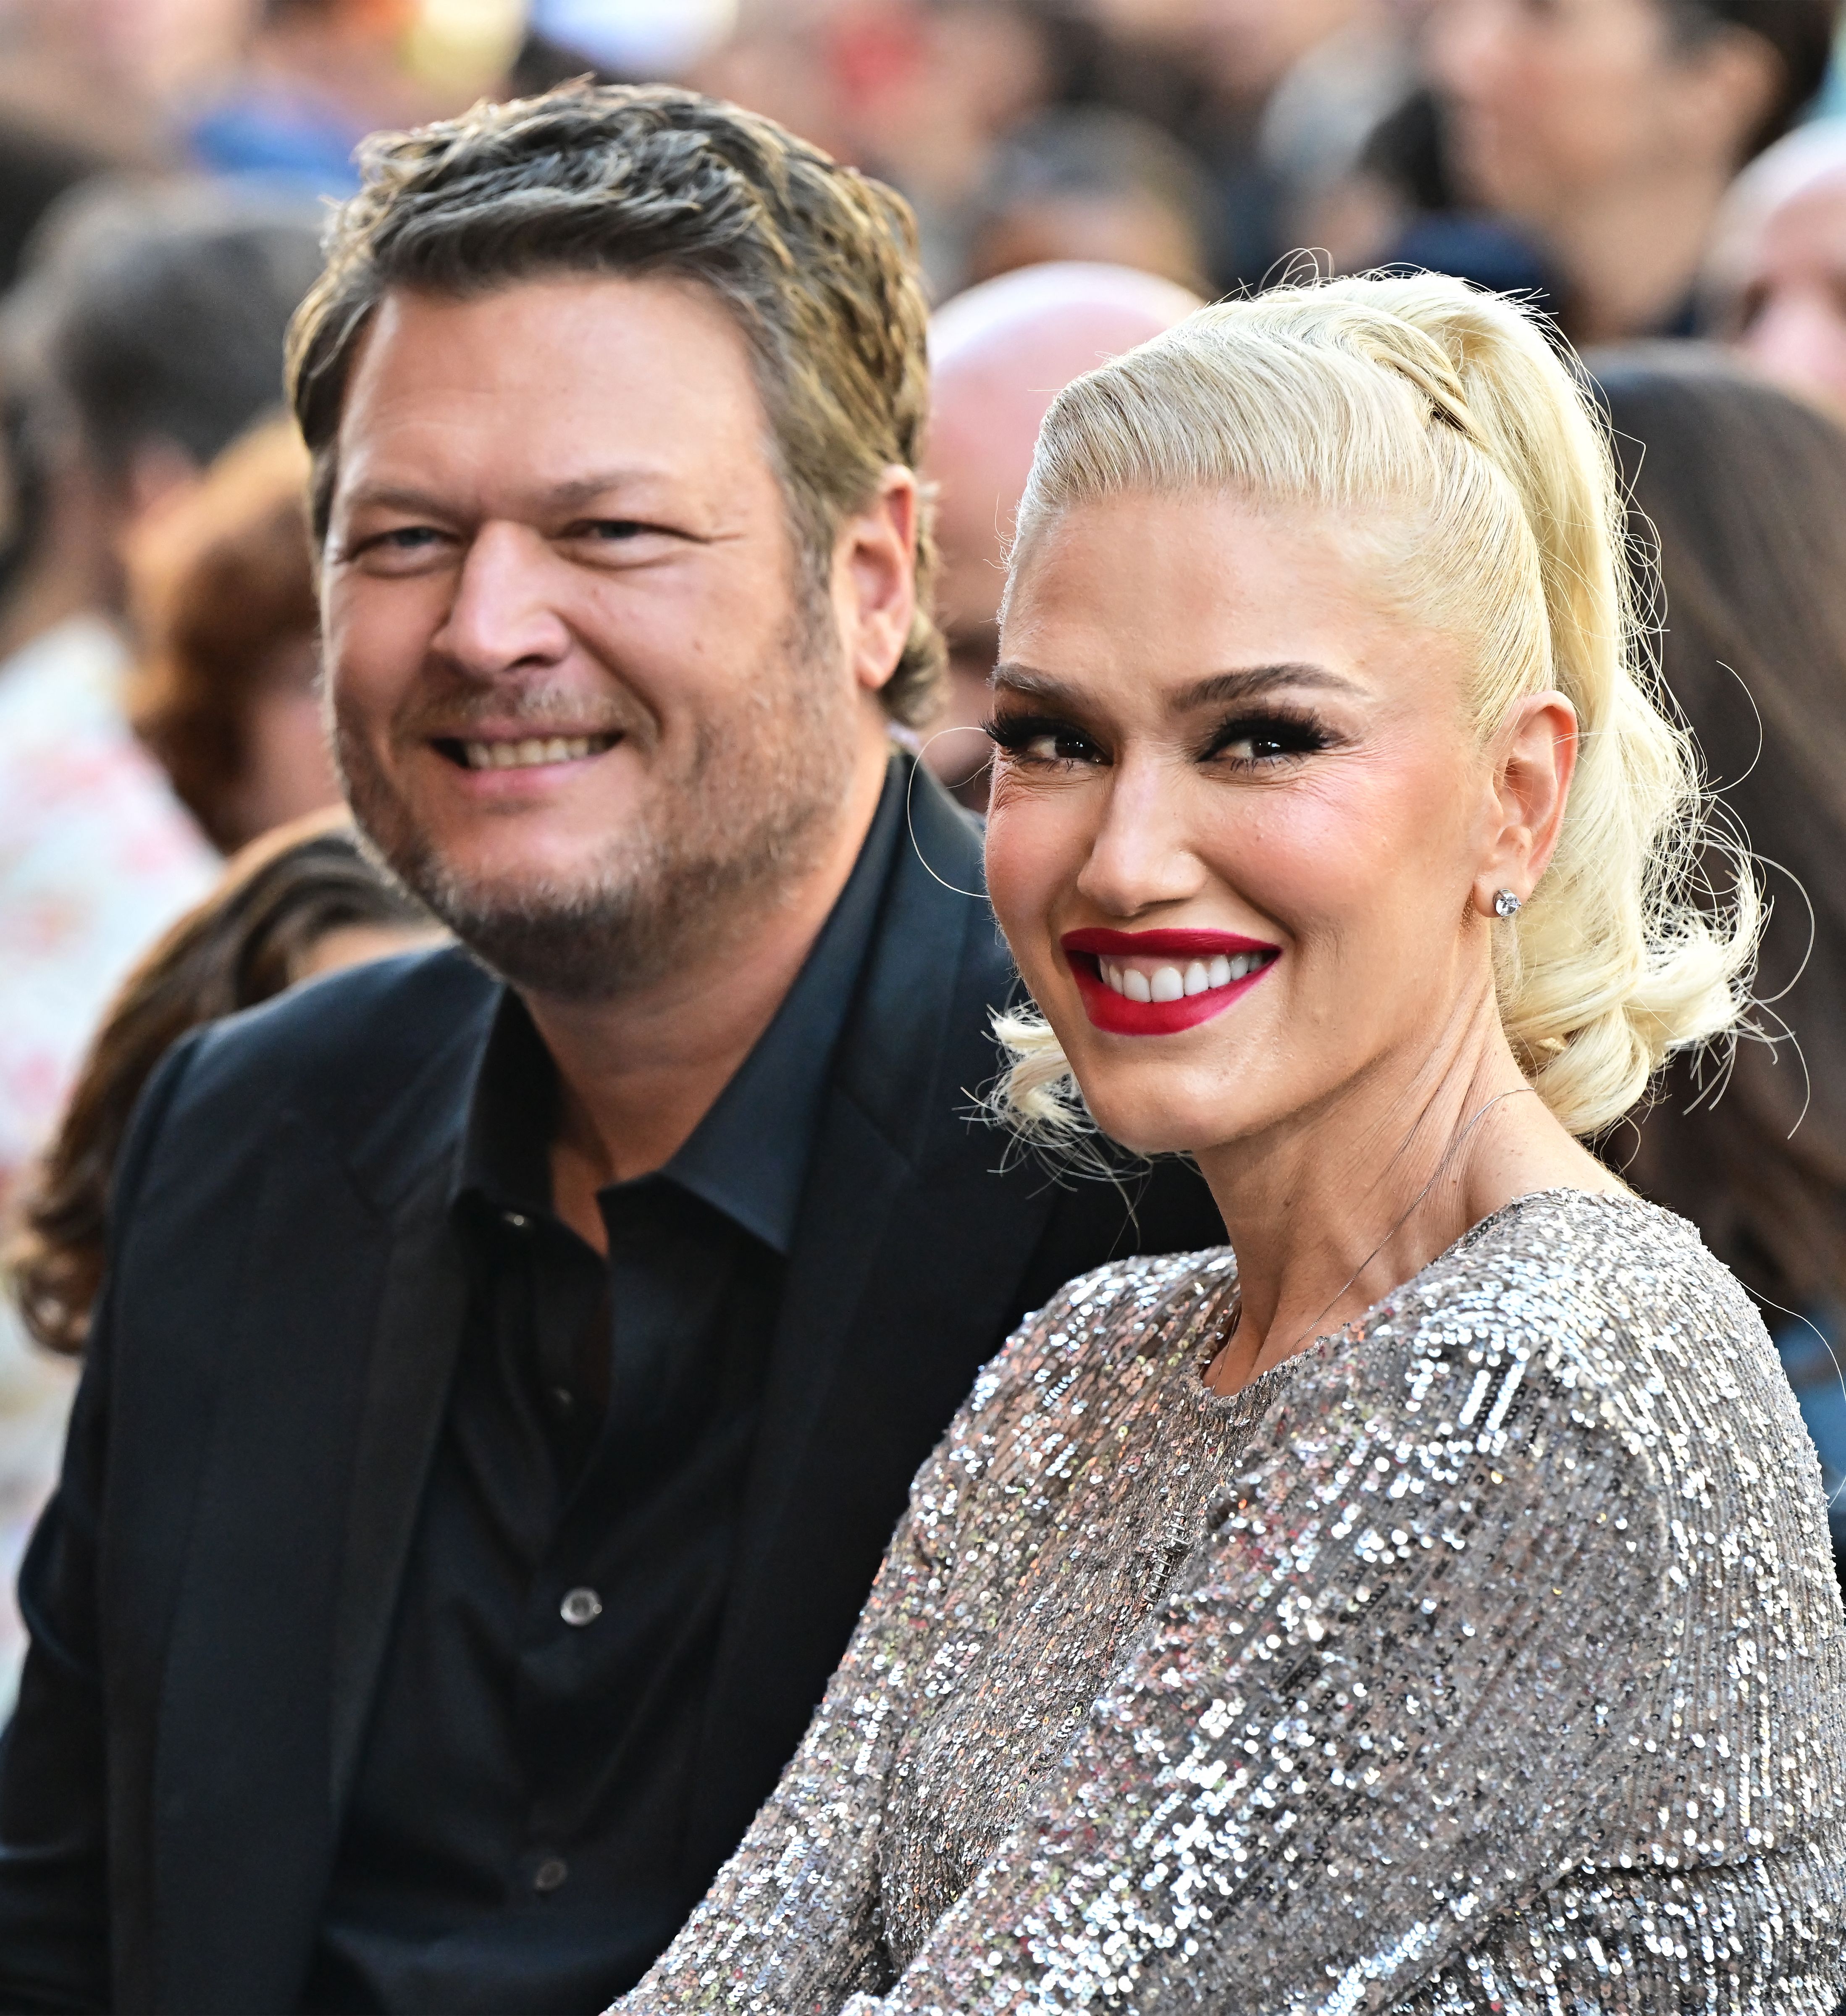 Blake and Gwen married in 2021 after meeting as coaches on The Voice